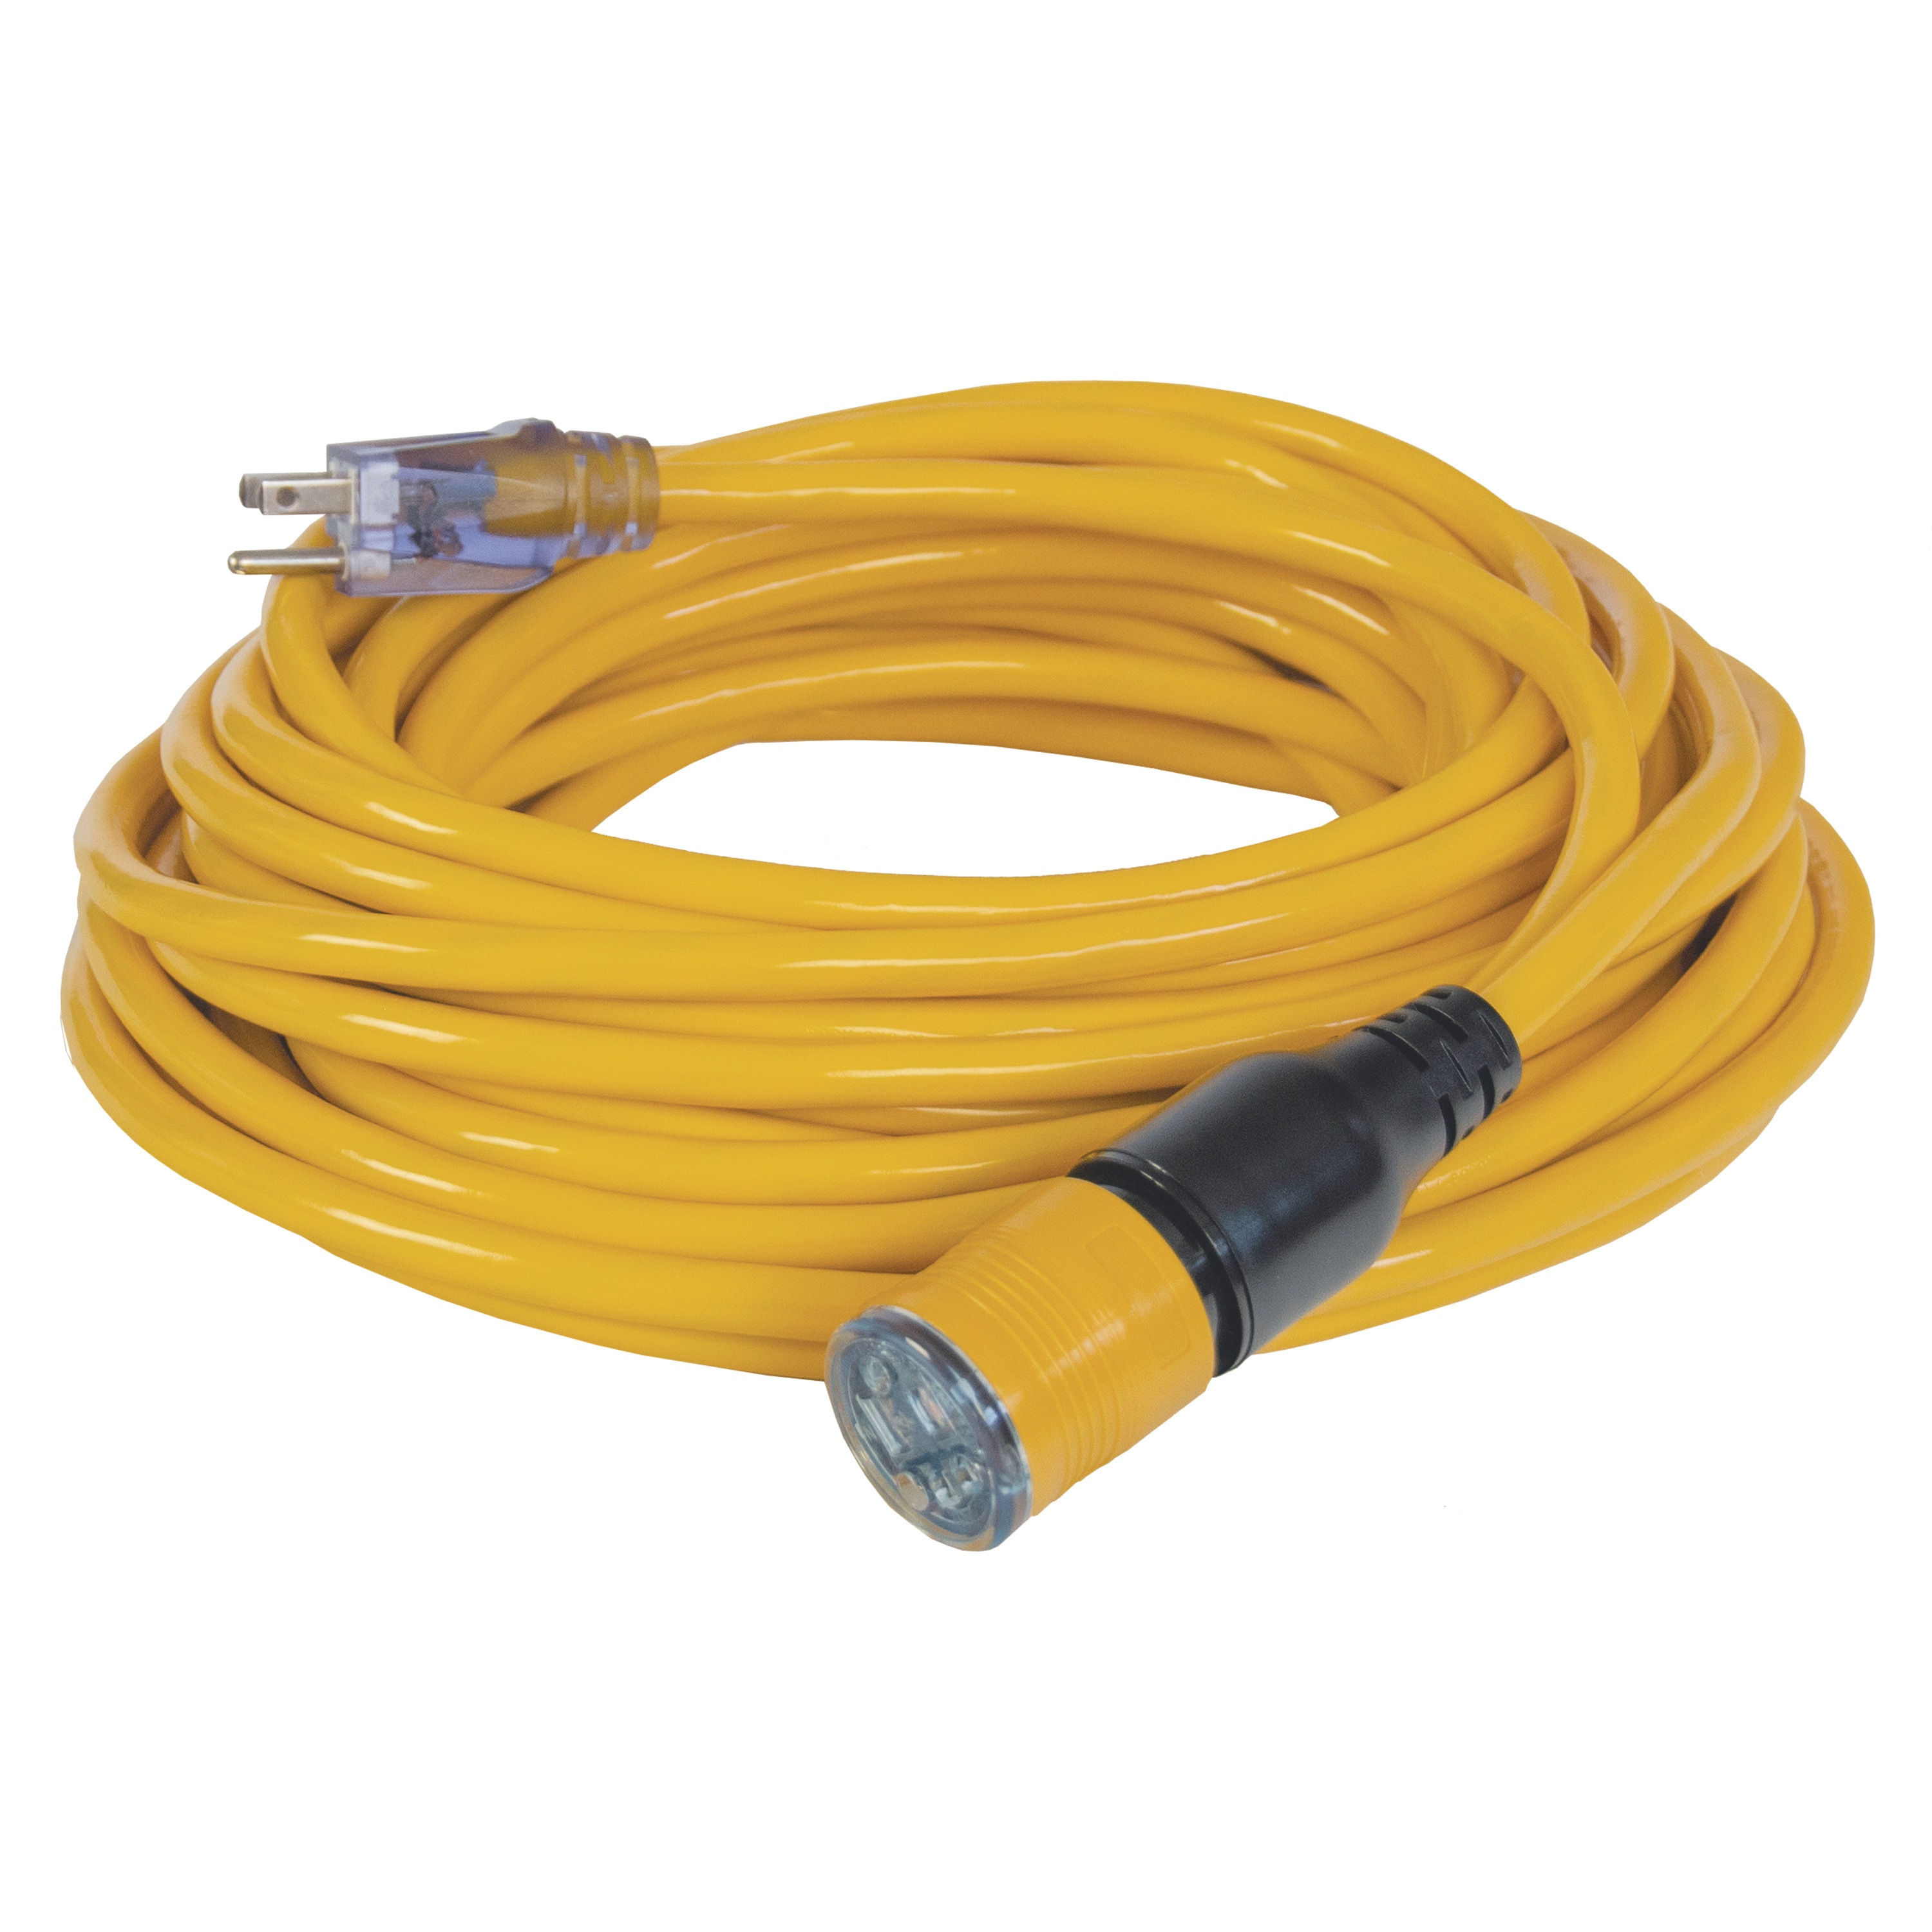 Profile of 50 feet Lighted Locking C G M Extension Cord.